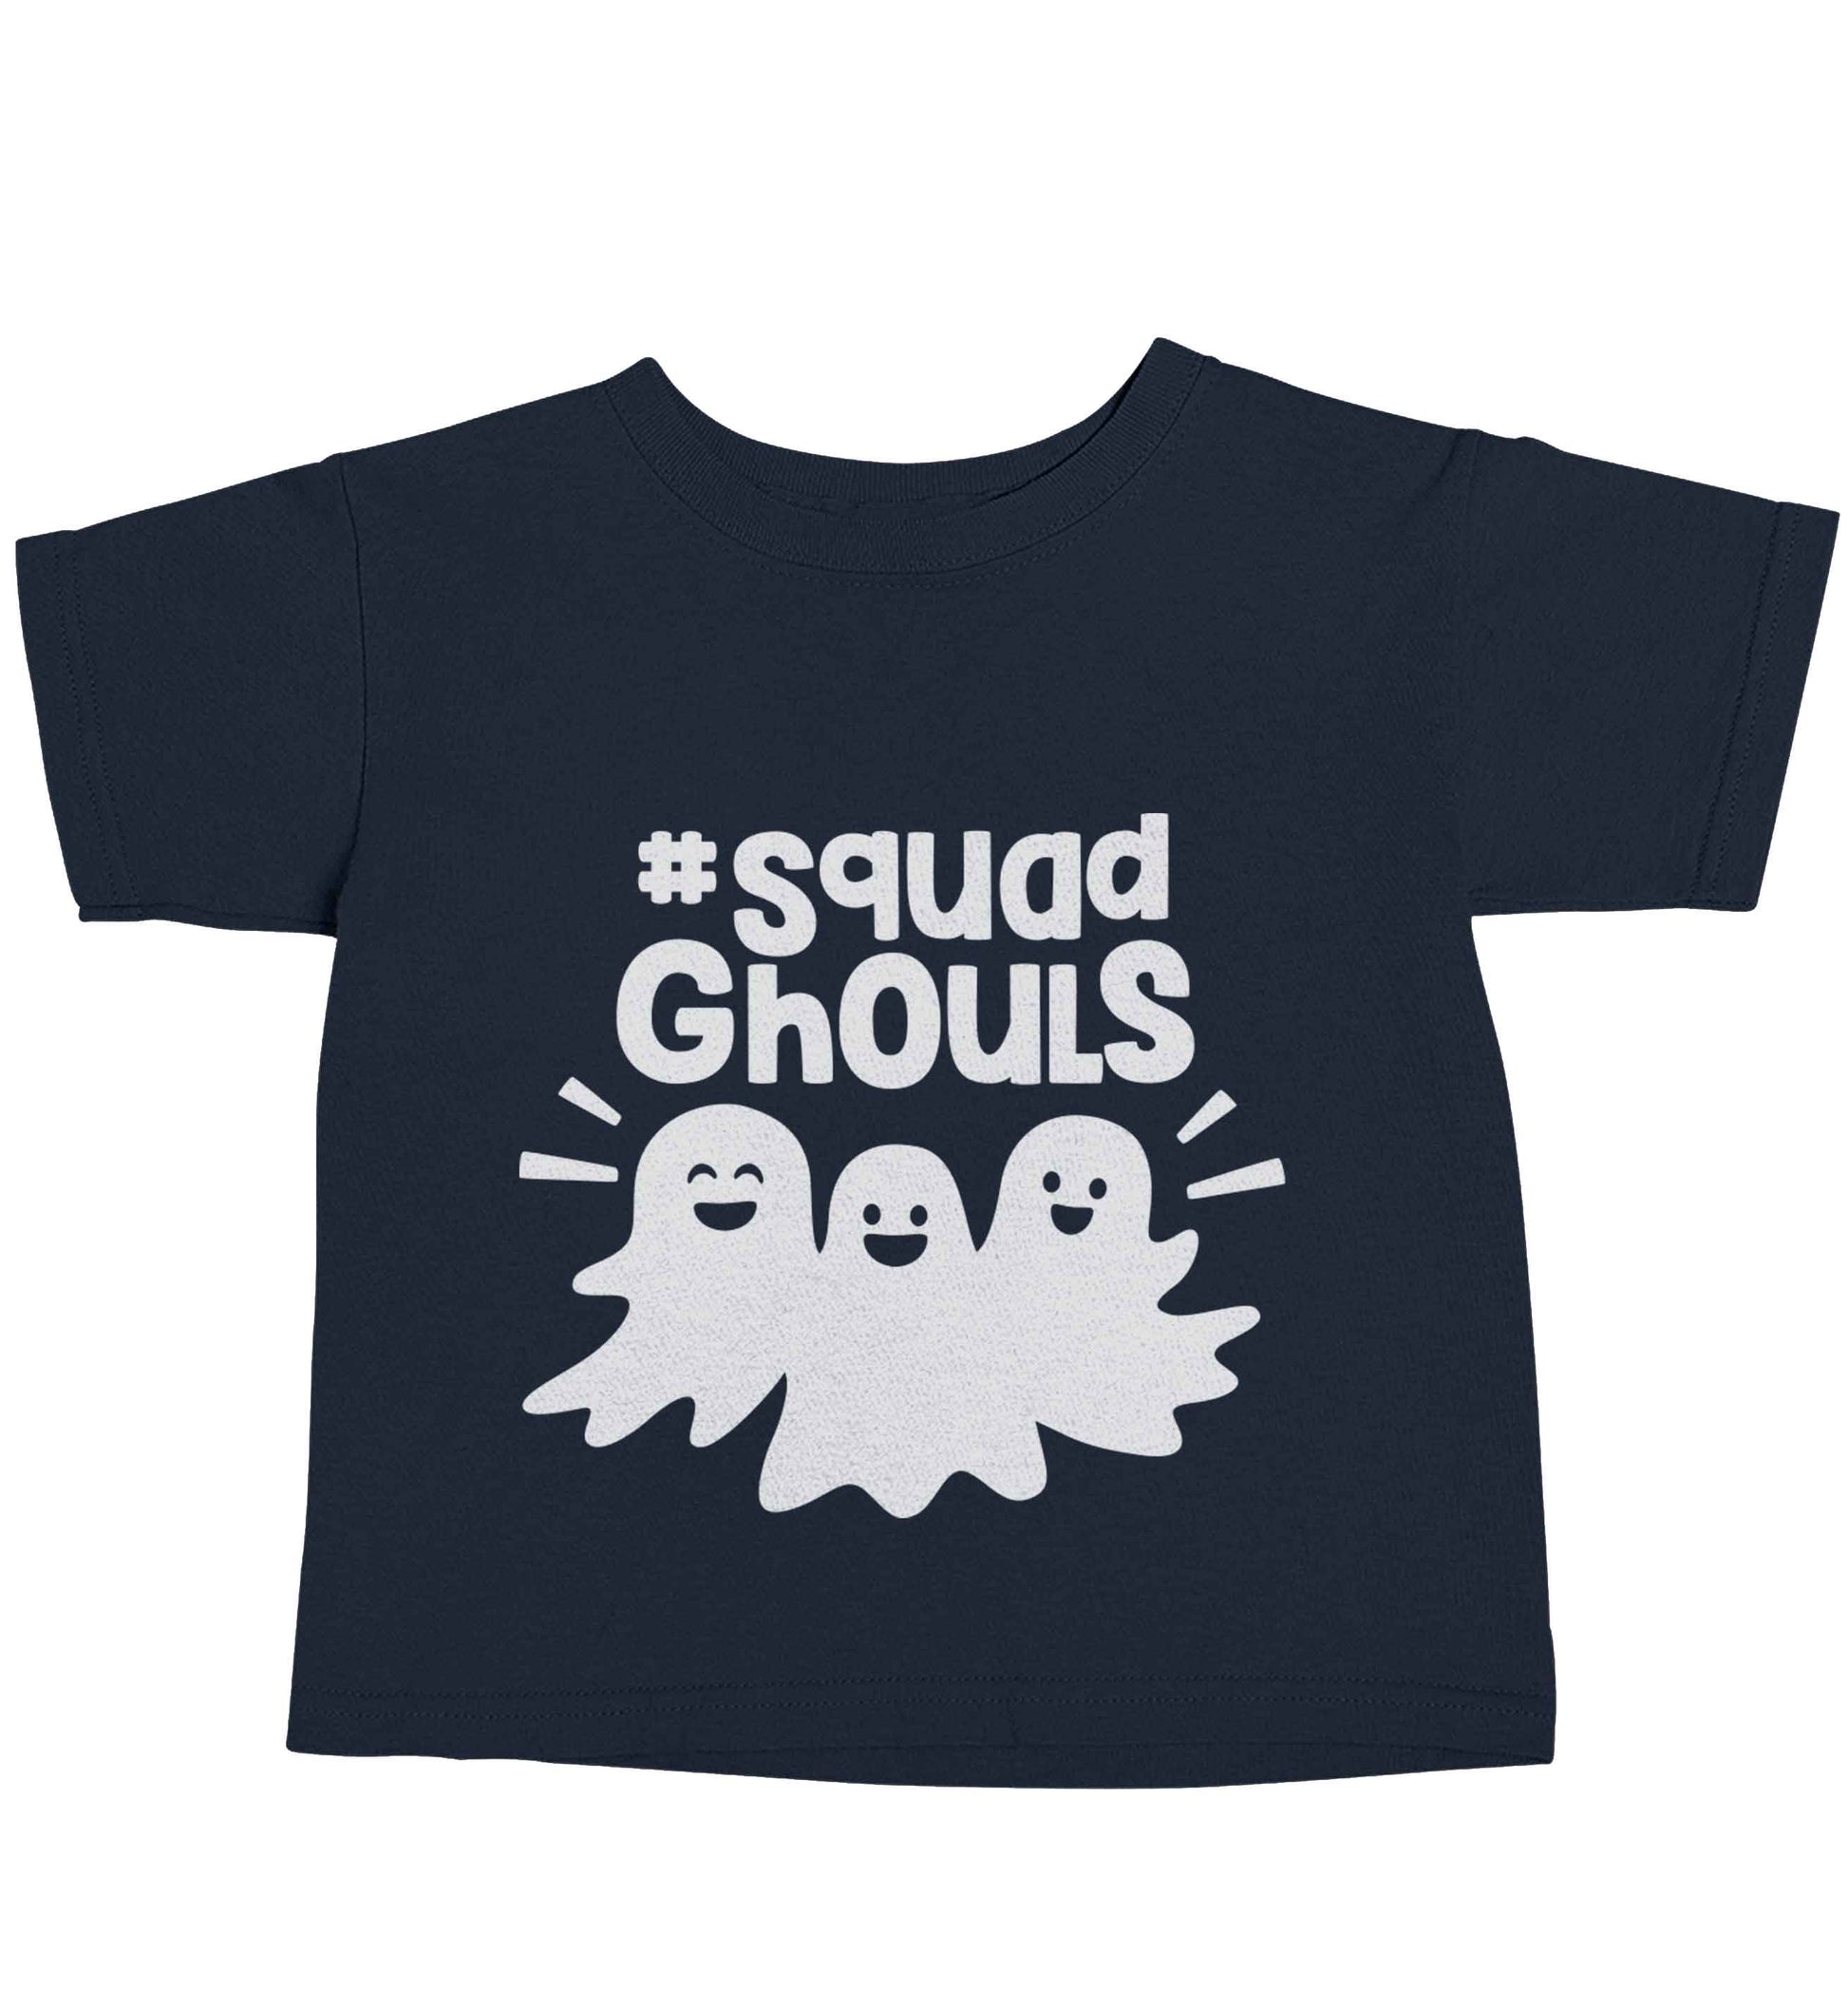 Squad ghouls Kit navy baby toddler Tshirt 2 Years